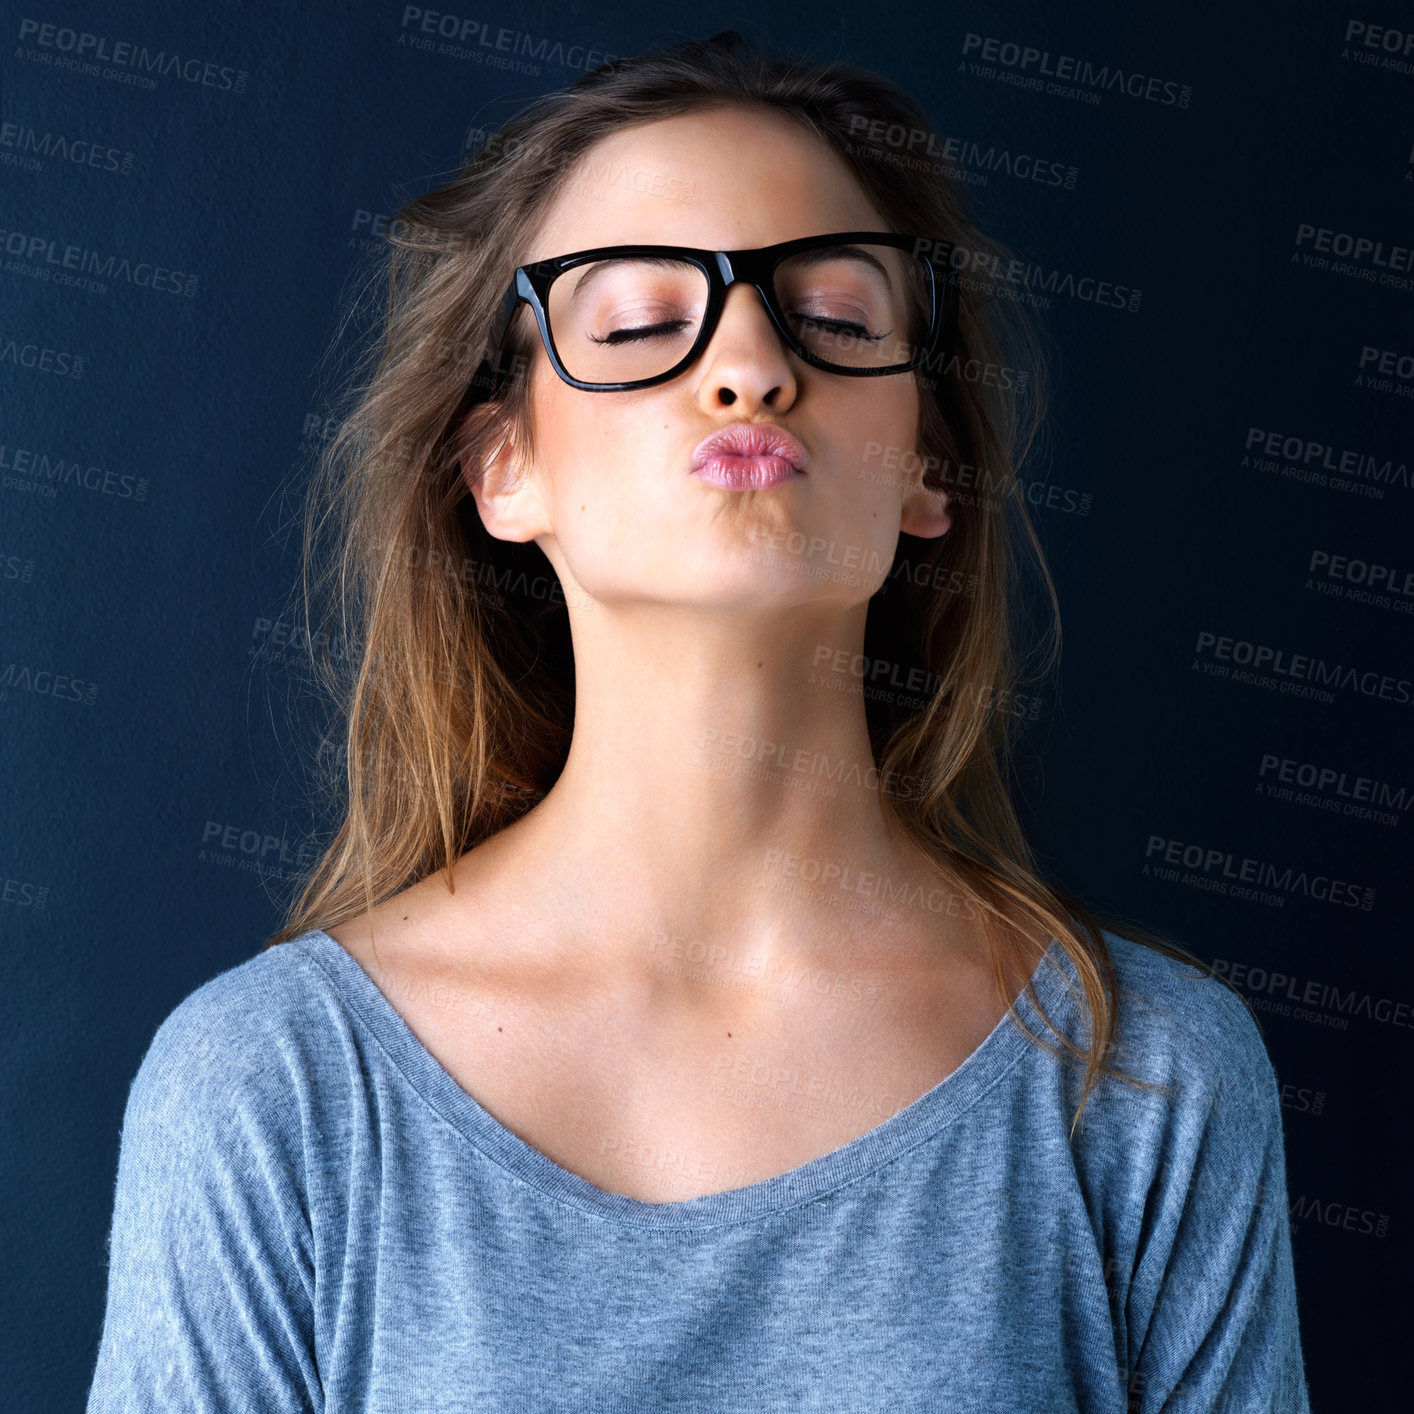 Buy stock photo Studio shot of a cute teenage girl in glasses blowing a kiss posing against a dark background